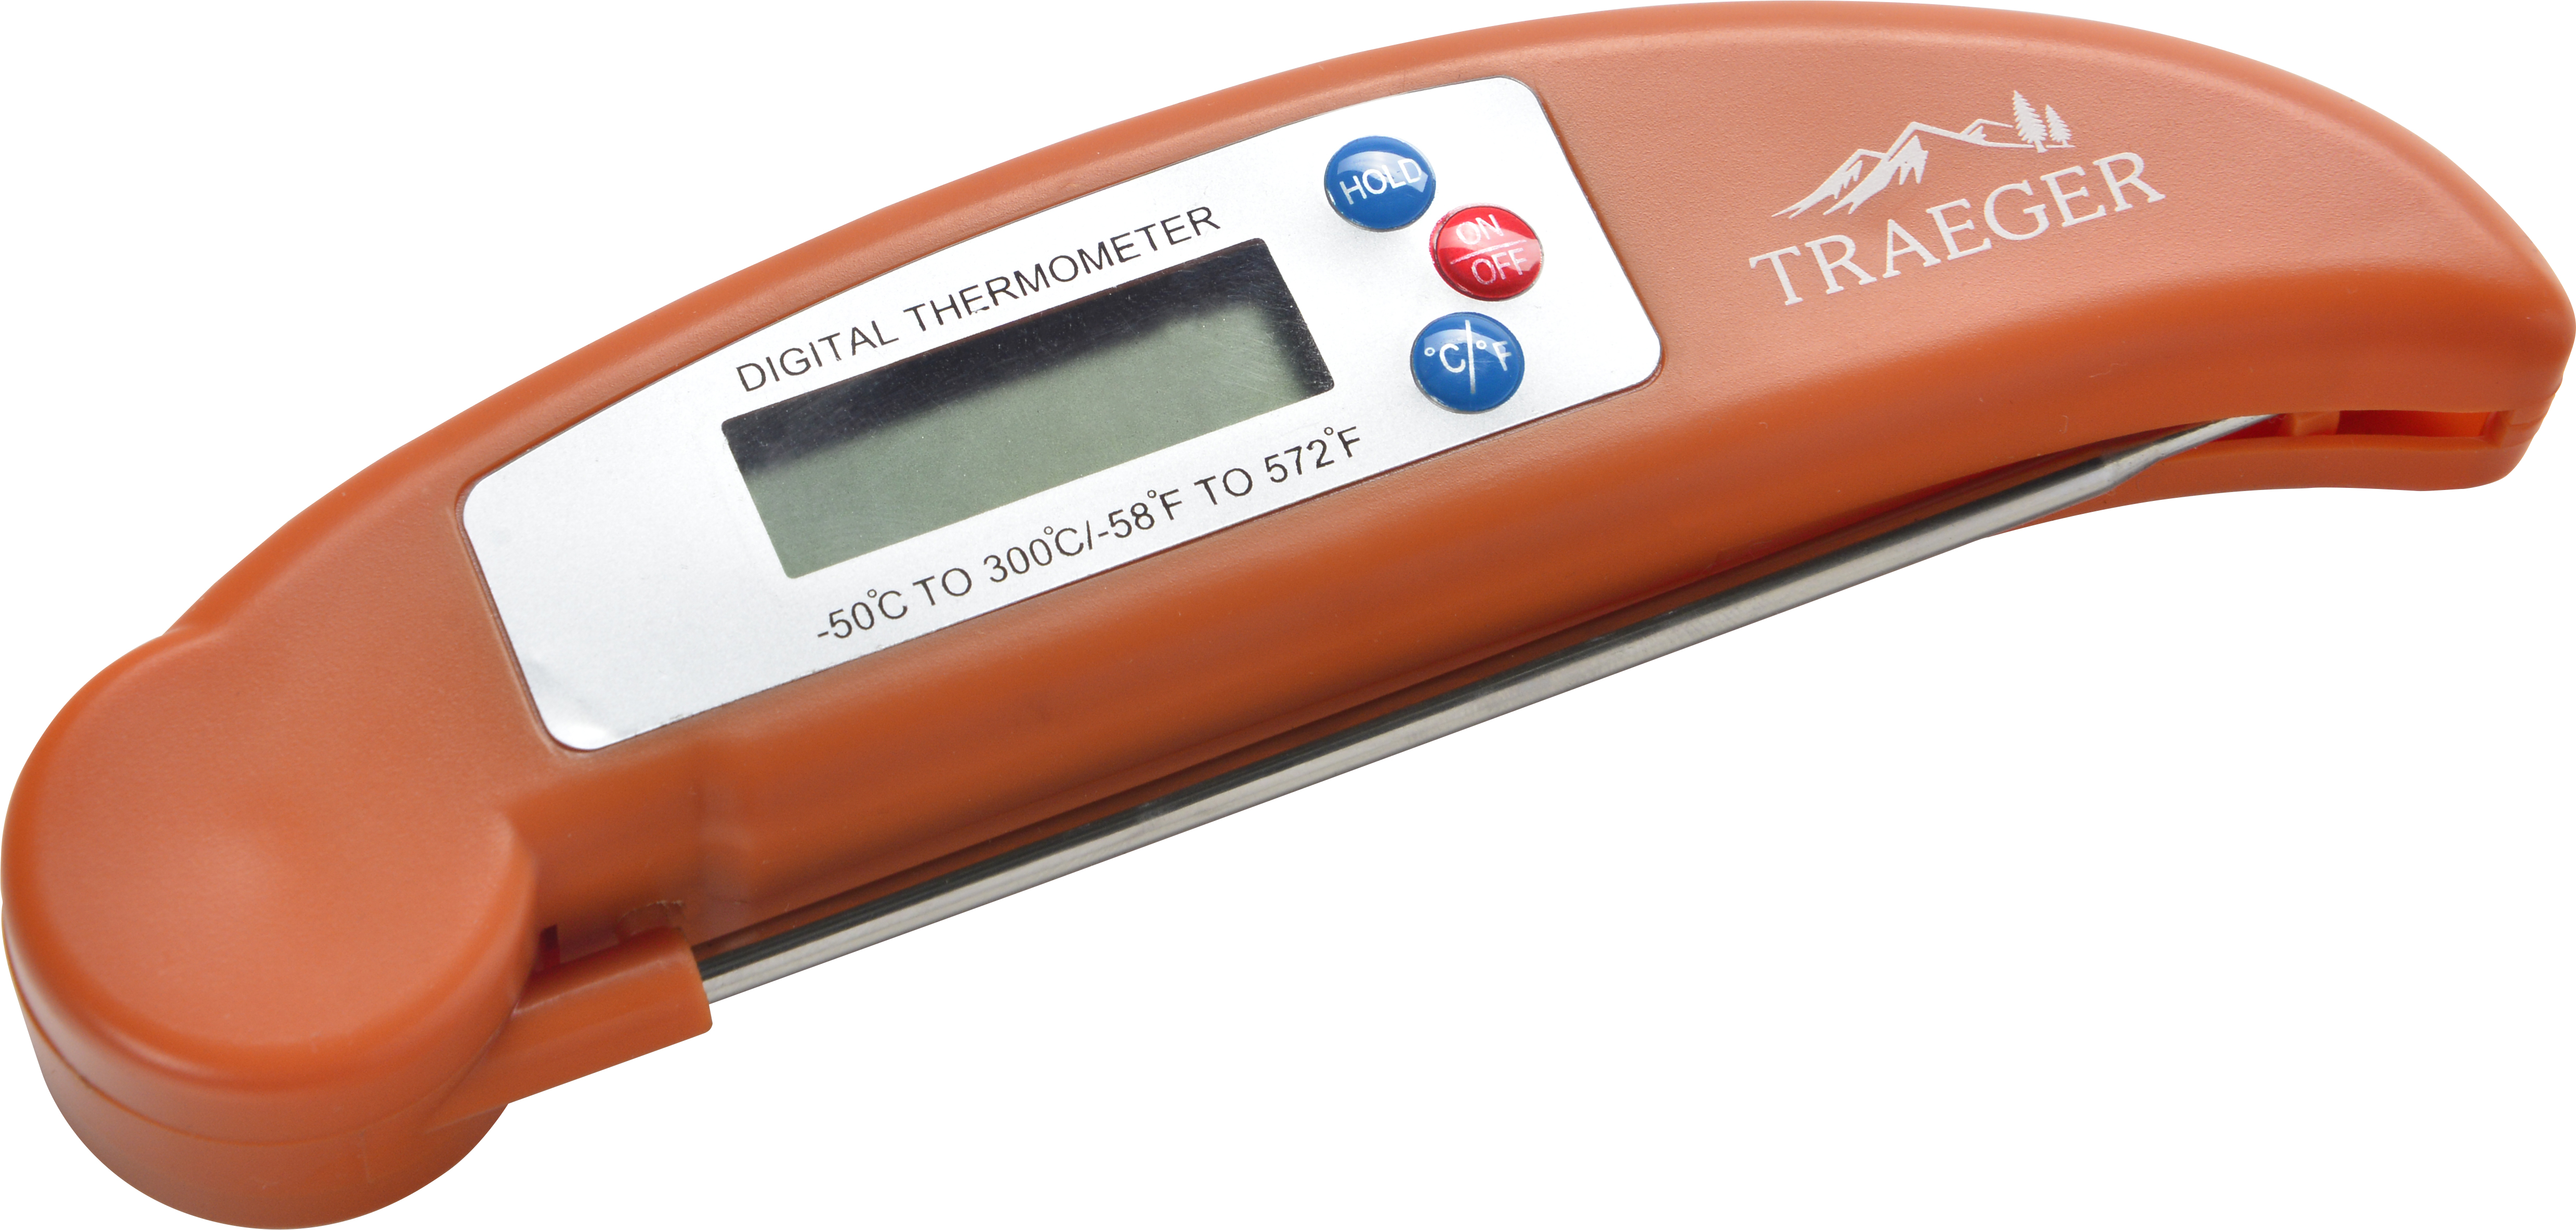 Traeger Digital Instant Read Thermometer